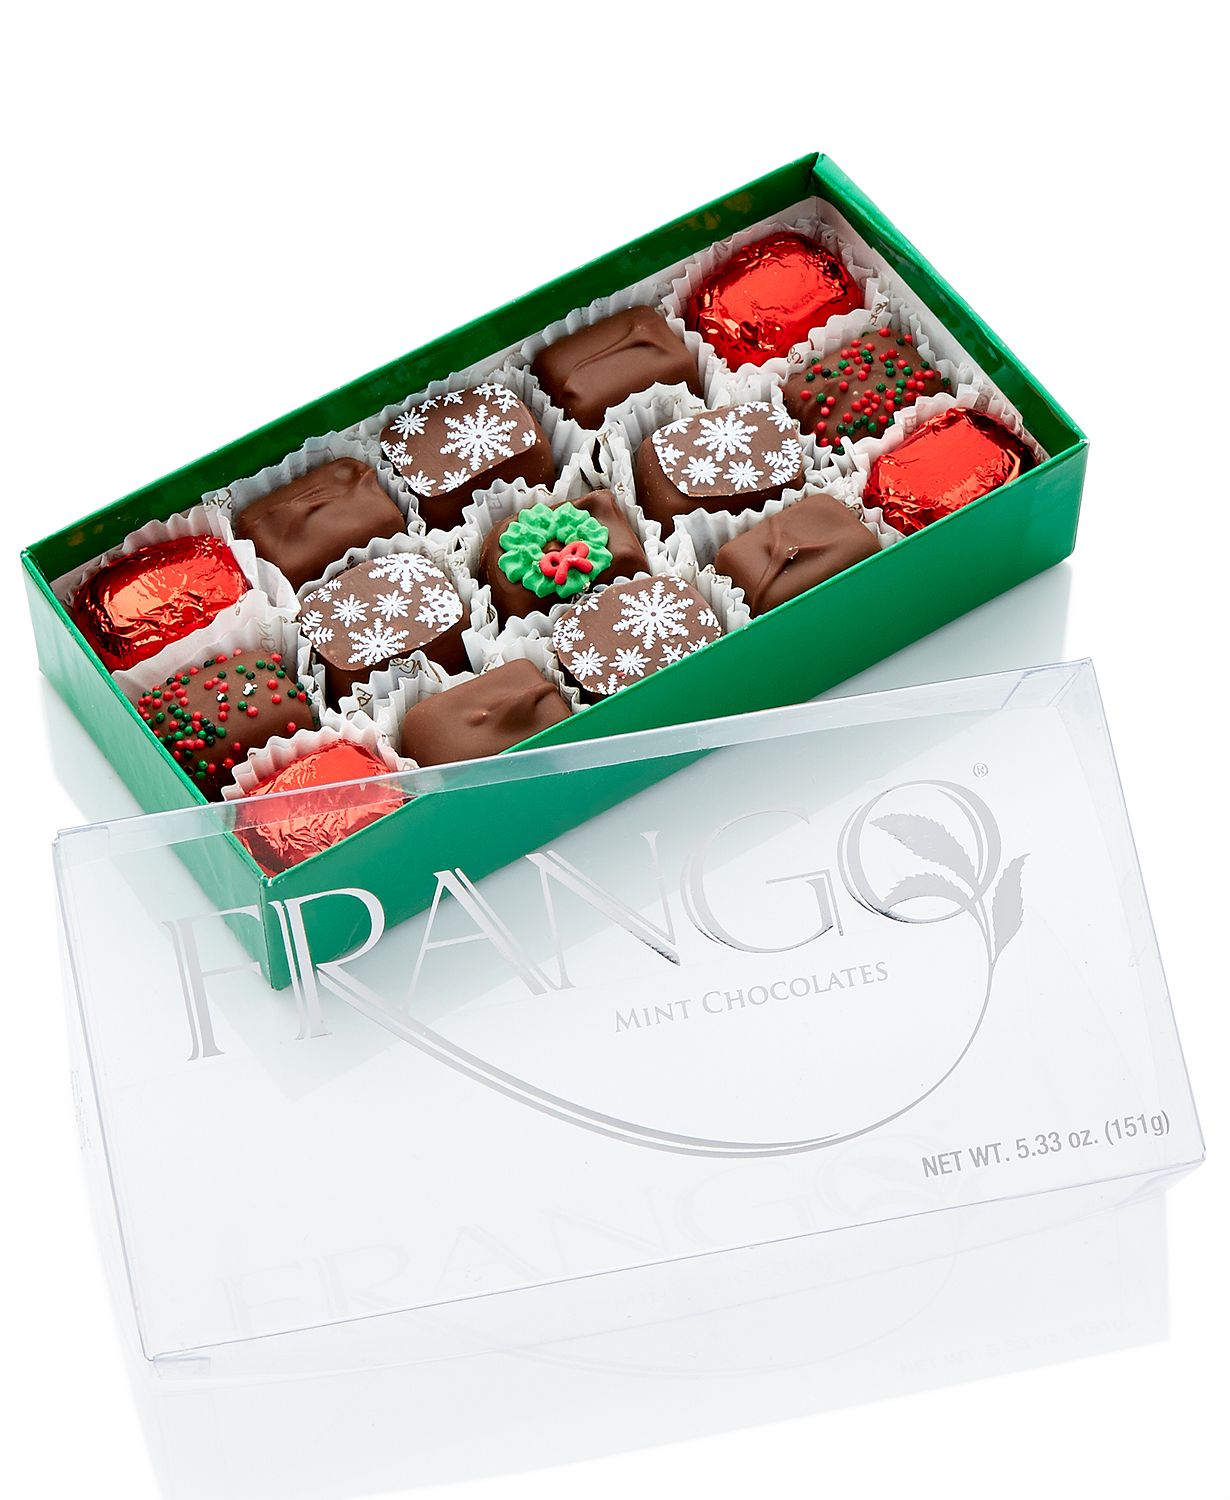 Frango Chocolates 5.99 Get them for the Holidays NOW while they are